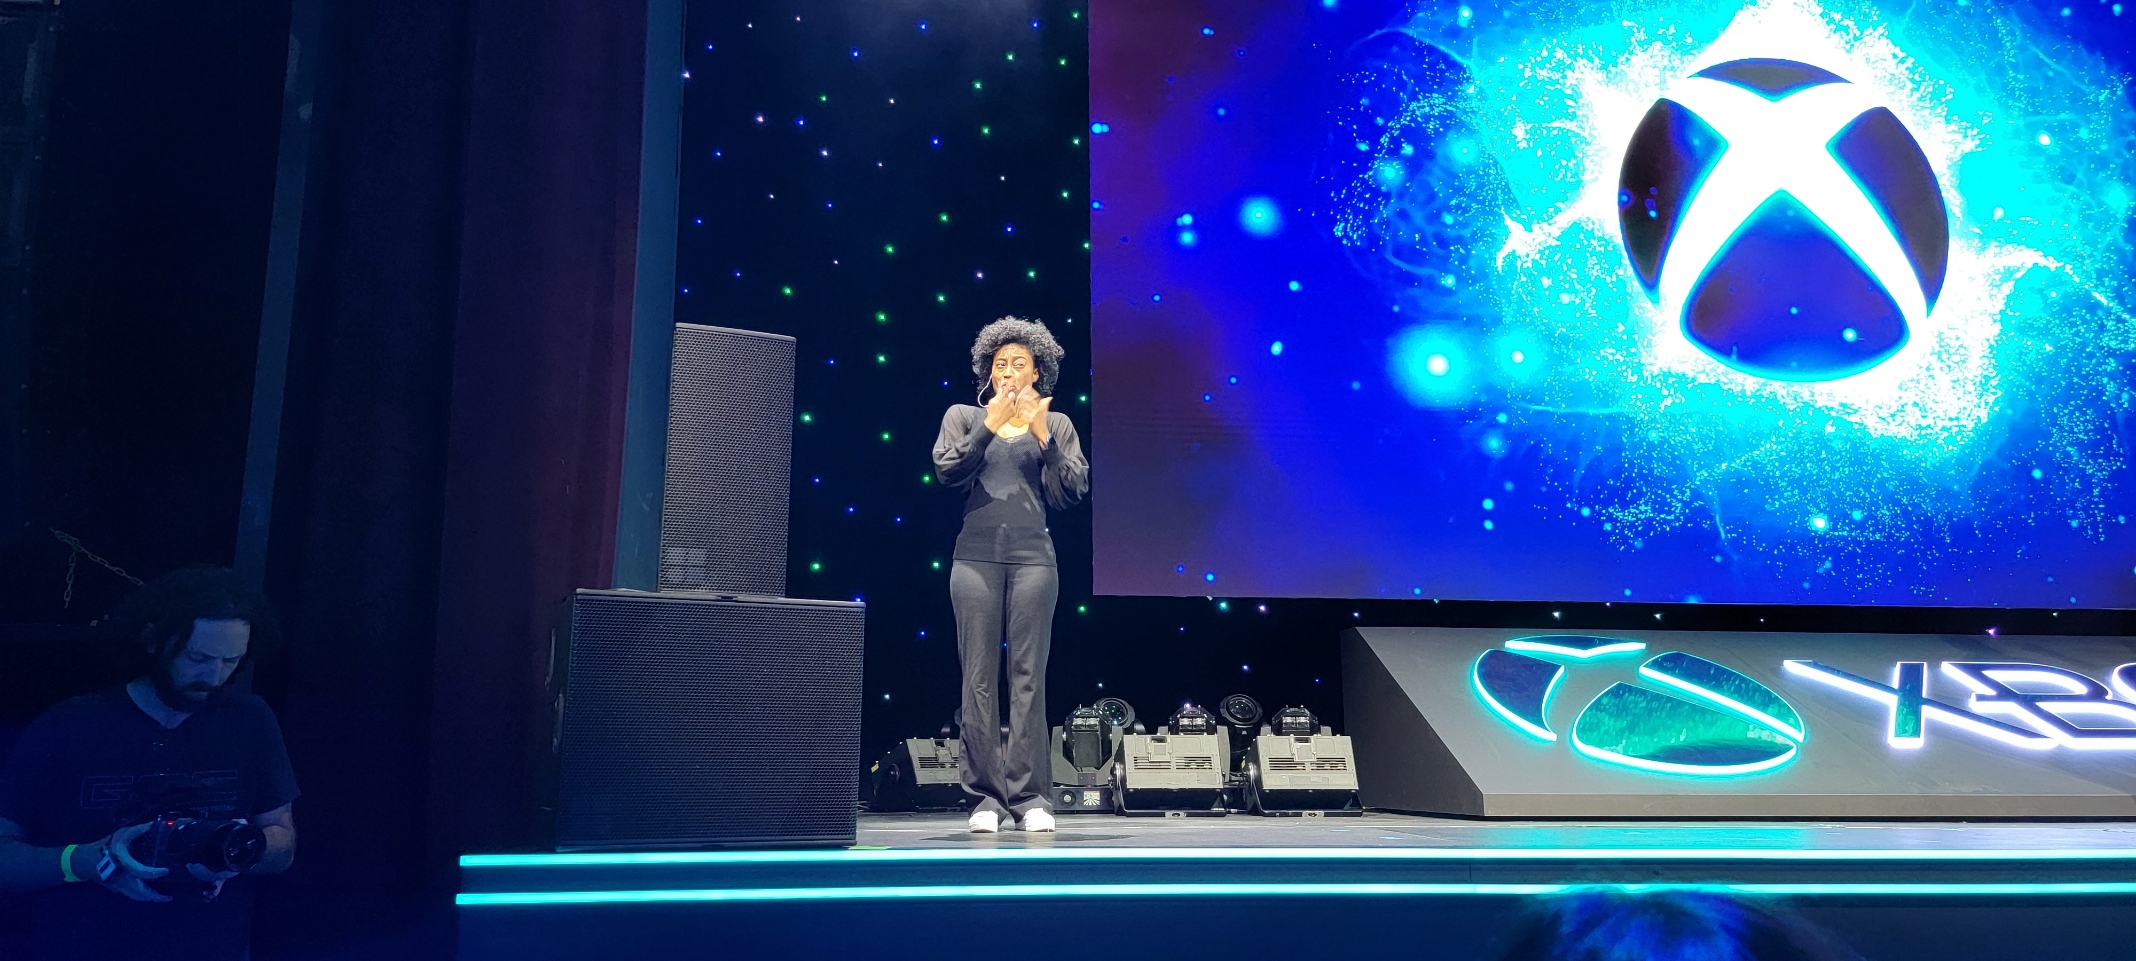 A woman stands on a stage, signing. Behind her and Xbox logo is projected on a screen.